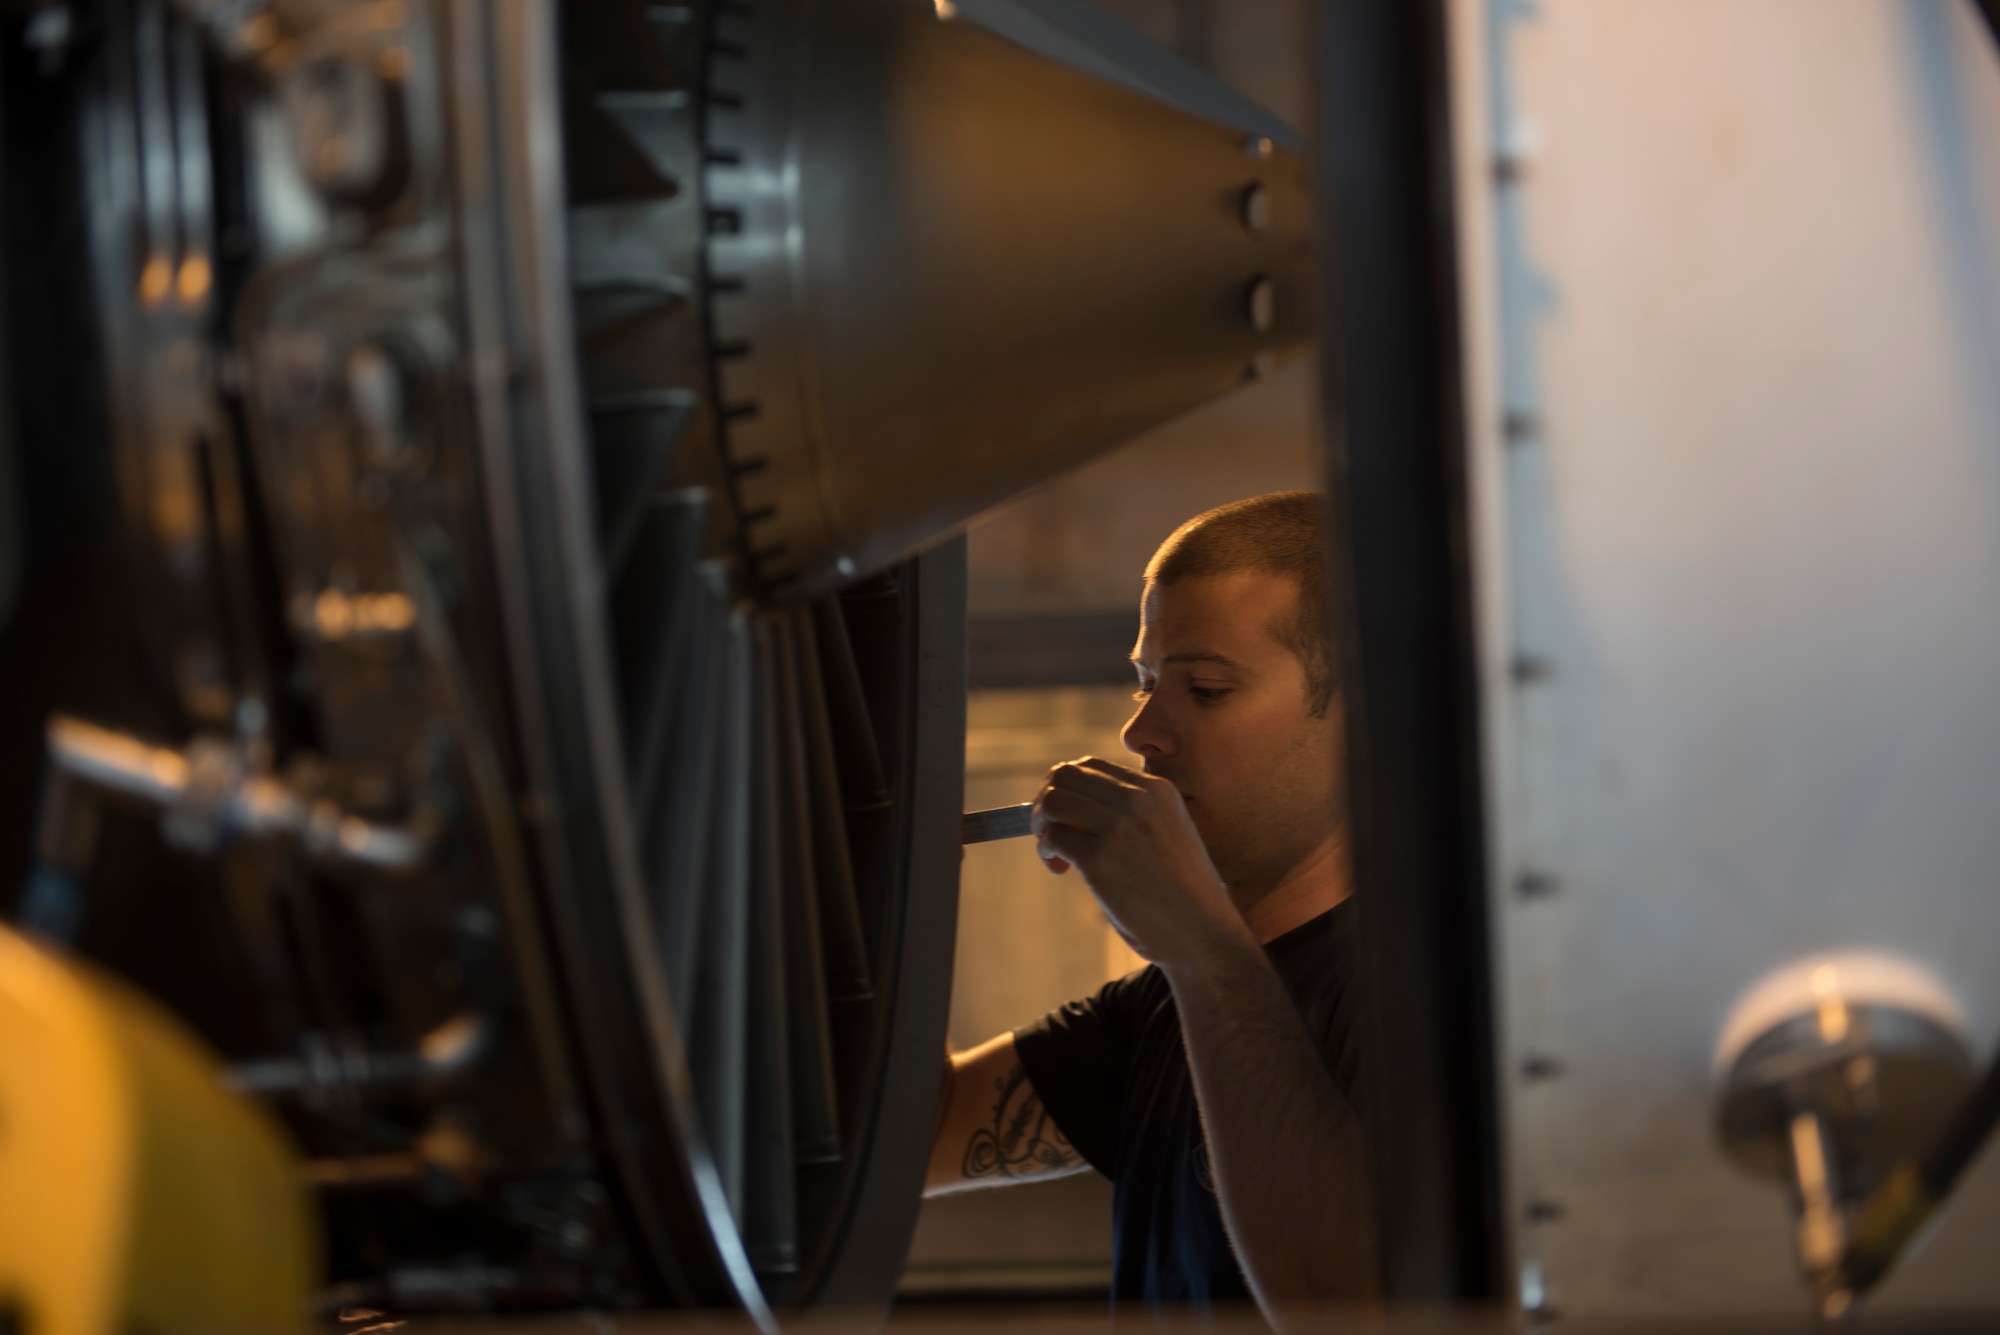 U.S. Air Force Staff Sgt. Stephen Baudo, 18th Component Maintenance Squadron aerospace propulsion craftsman, checks spacing on an engine blade March 10, 2017, at Kadena Air Base, Japan. When installing new cores into an existing unit, the entire engine goes through a rigorous series of checks and tests before being declared mission ready. (U.S. Air Force photo by Airman 1st Class Quay Drawdy)